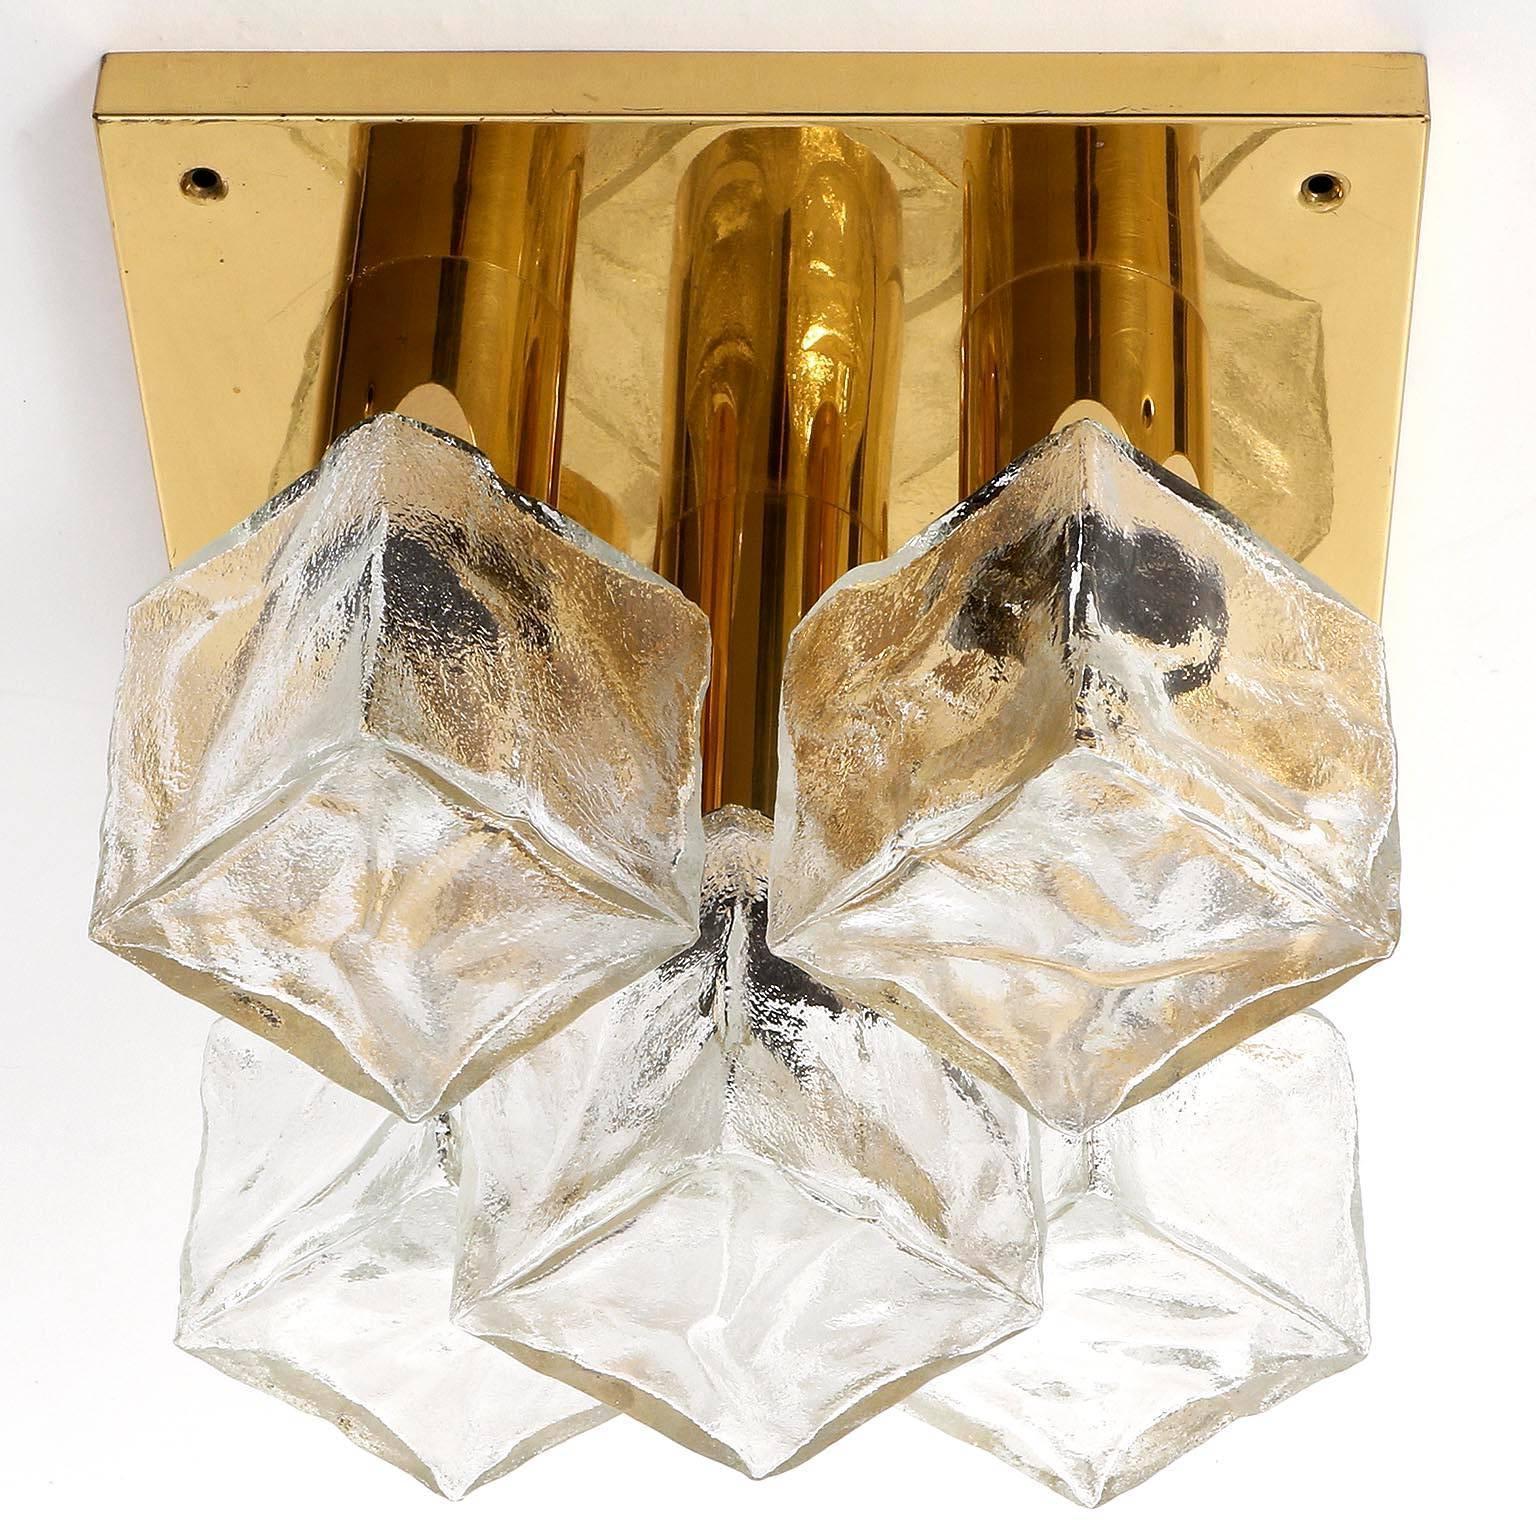 One of two modulare and square light fixtures model 'Cubus' (German 'Würfel') by J.T. Kalmar, Austria, manufactured in midcentury, circa 1970 (end of 1960s and beginning of 1970s).
They are made of polished brass and frosted cubic glass lamp shades.